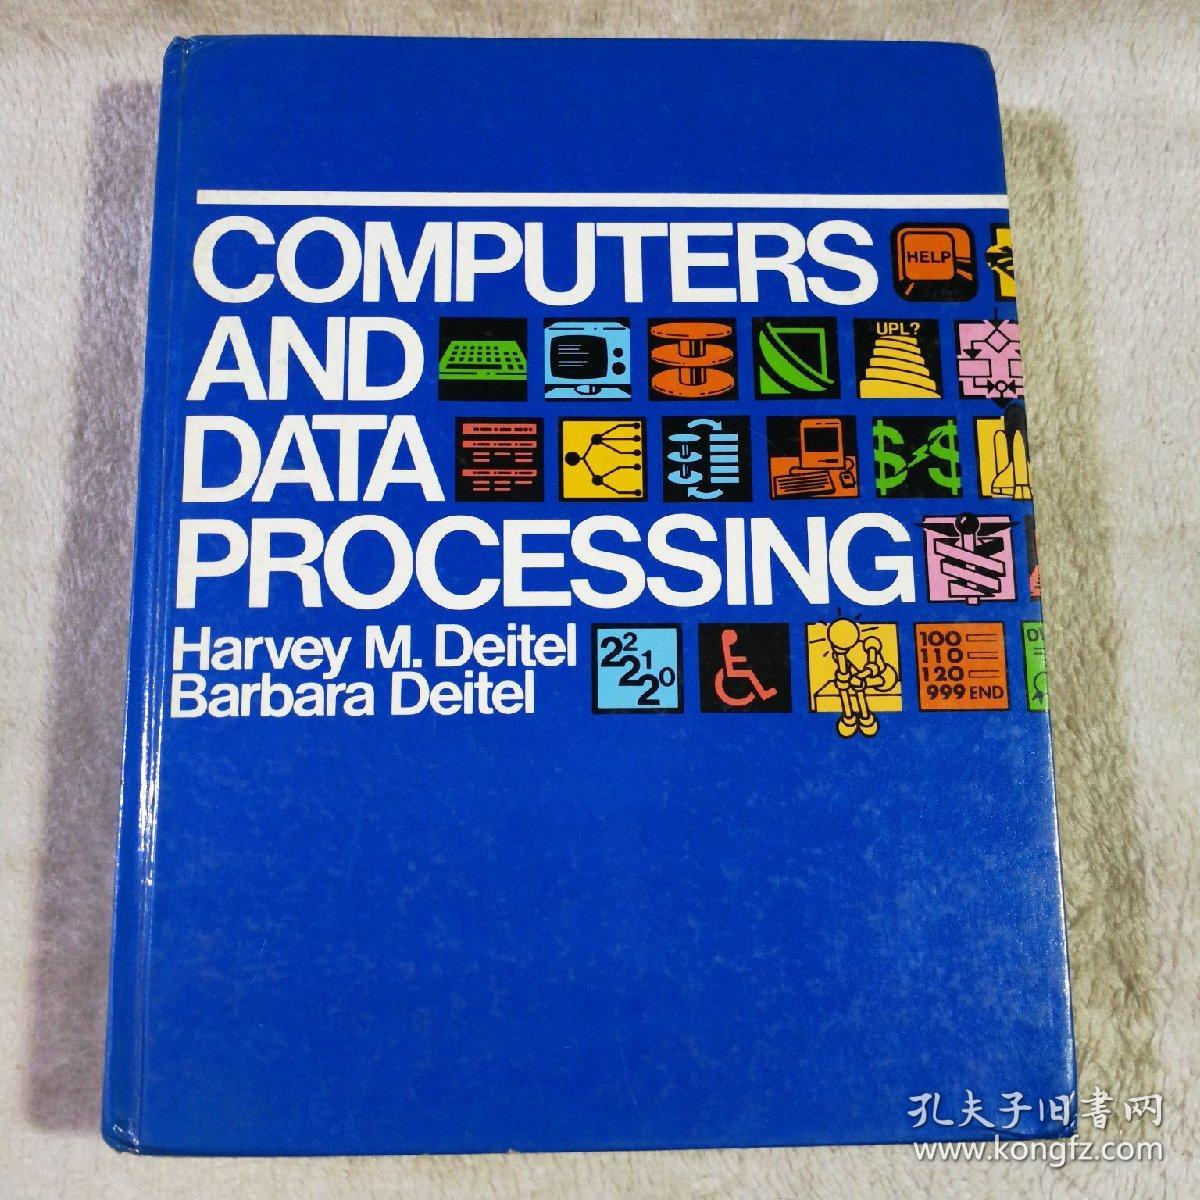 COMPUTERS AND DATA PROCESSING